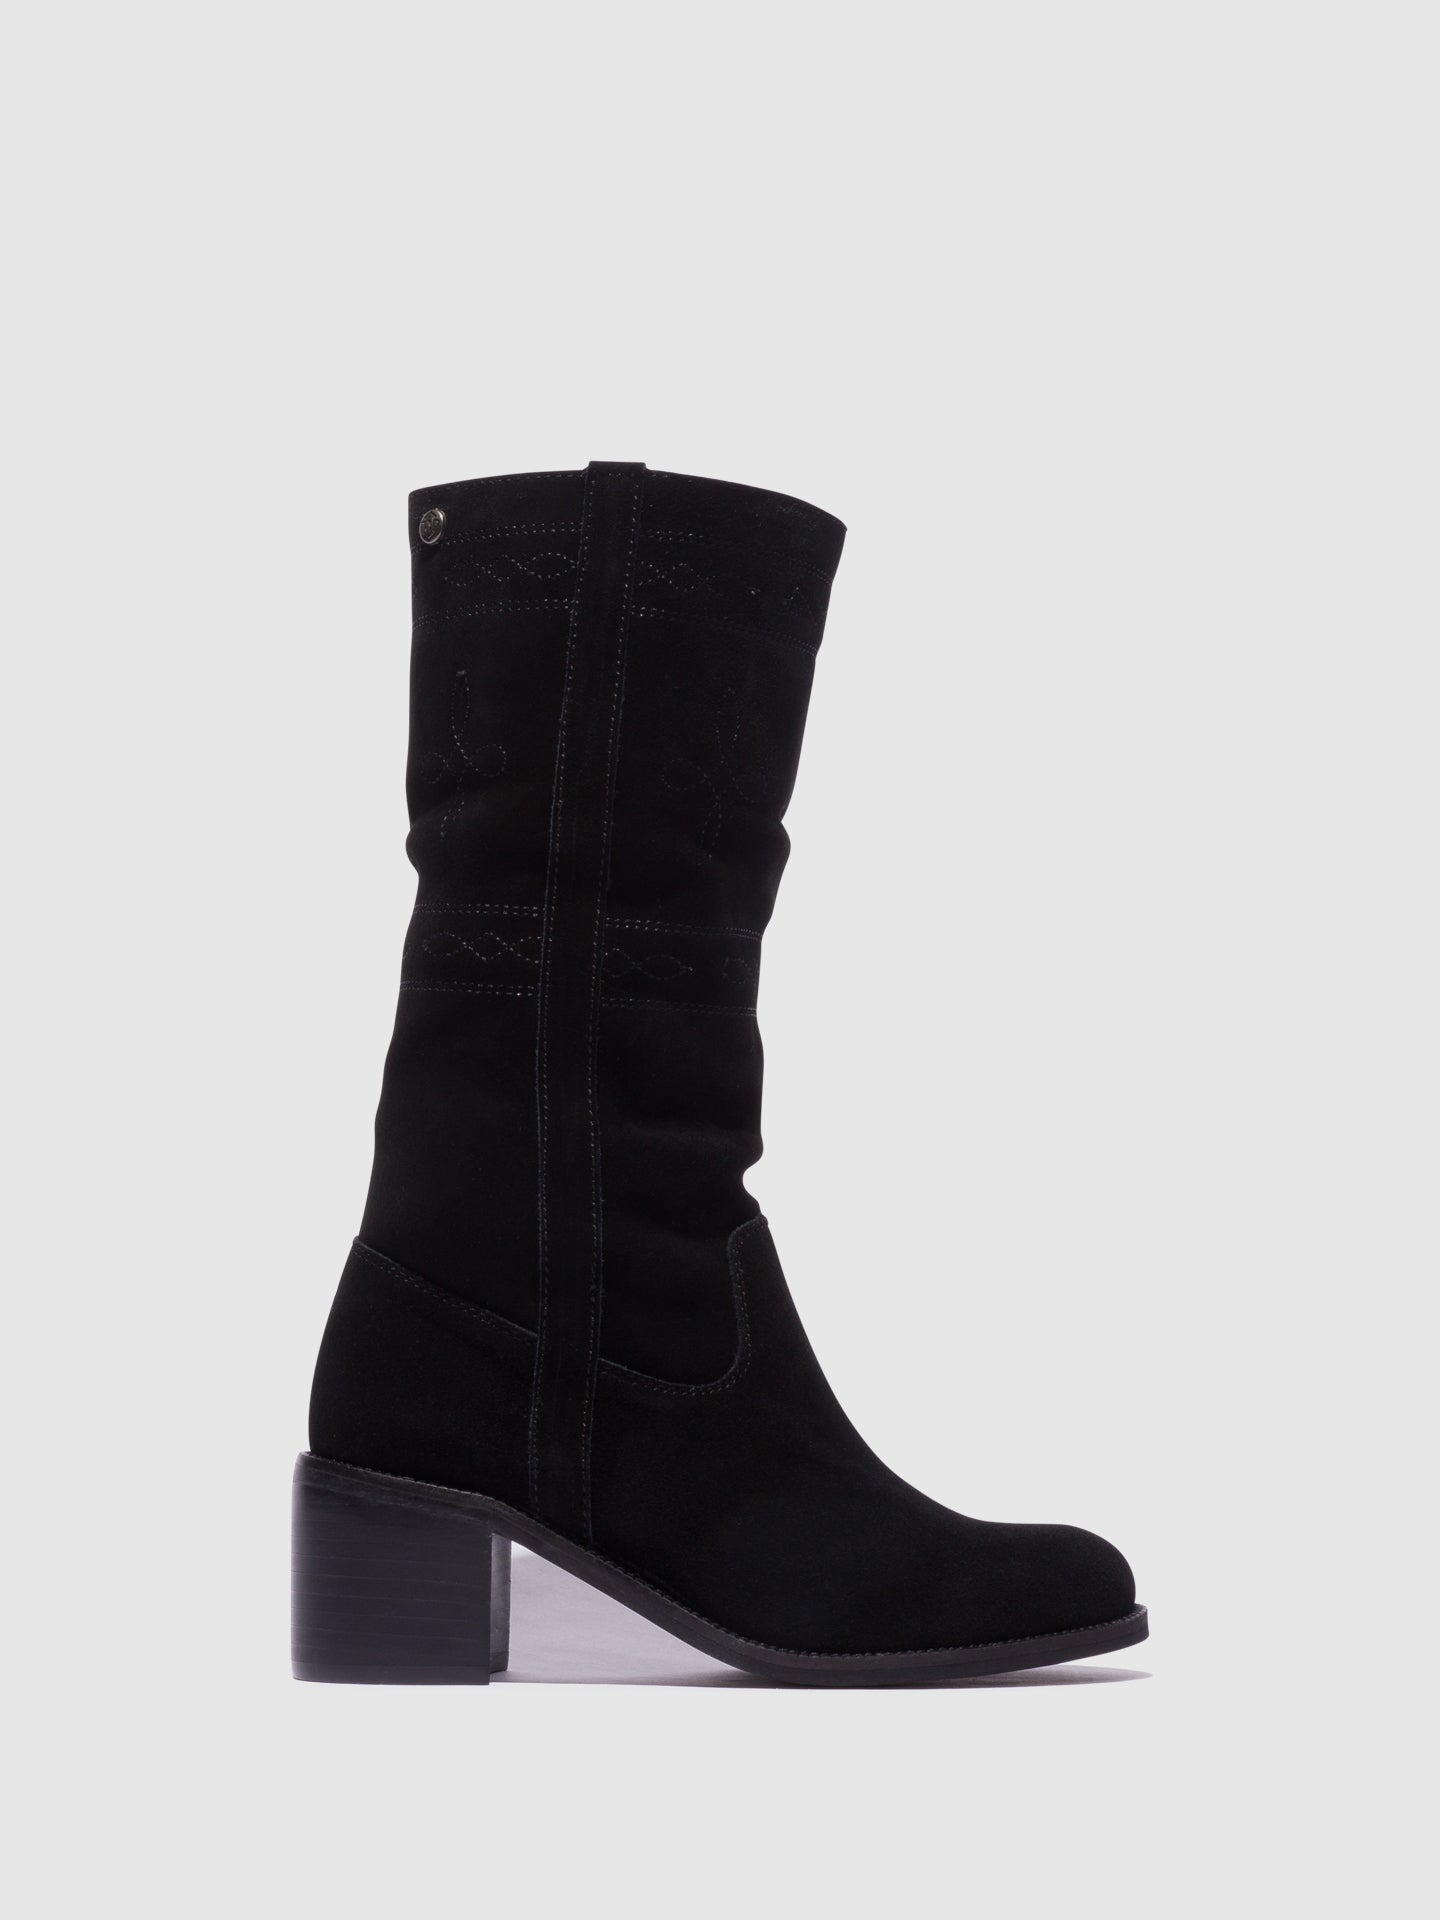 Top3 Black Round Toe Boots